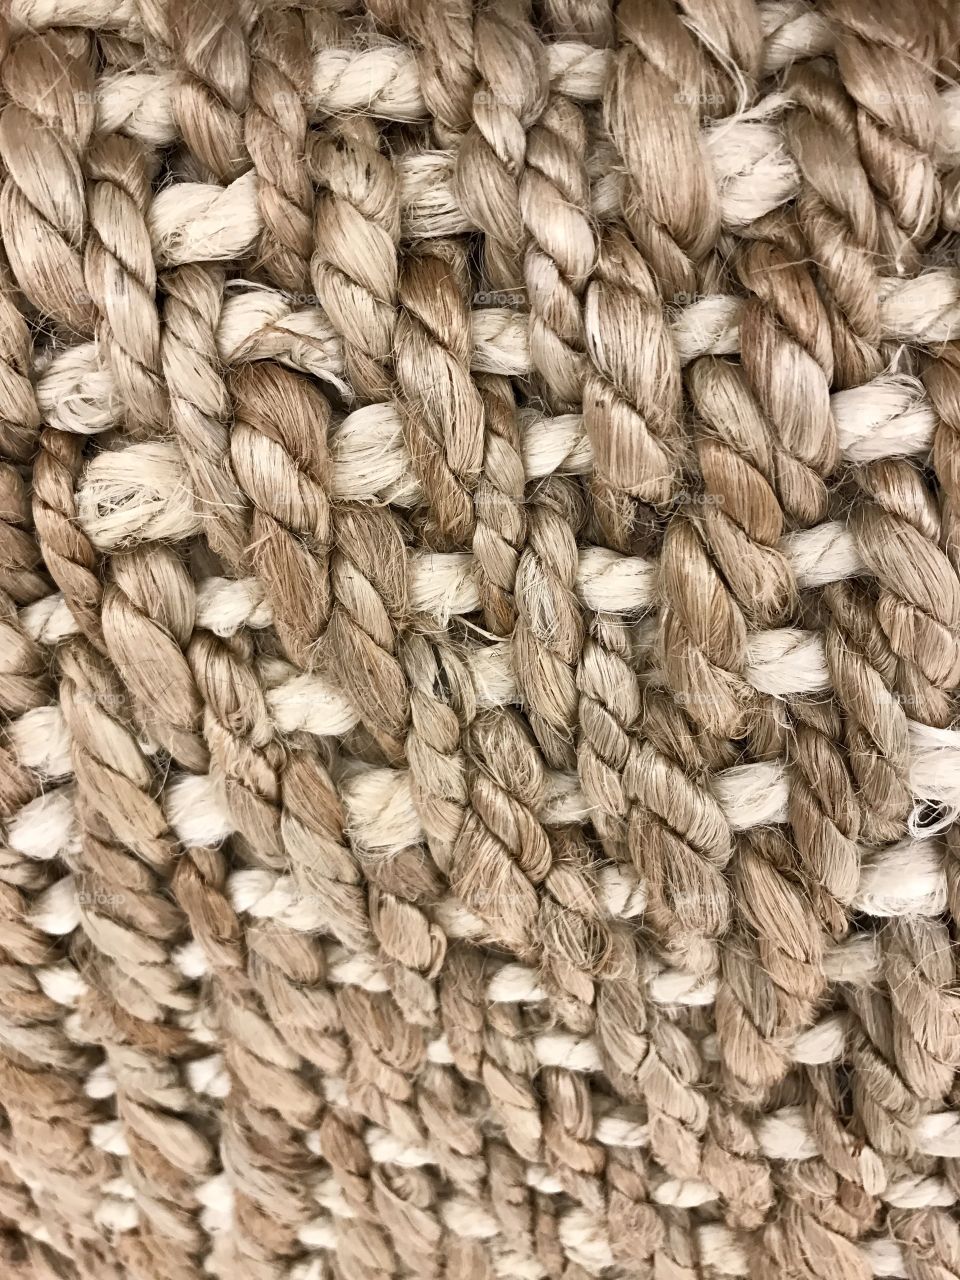 Knotty twisted woven basket